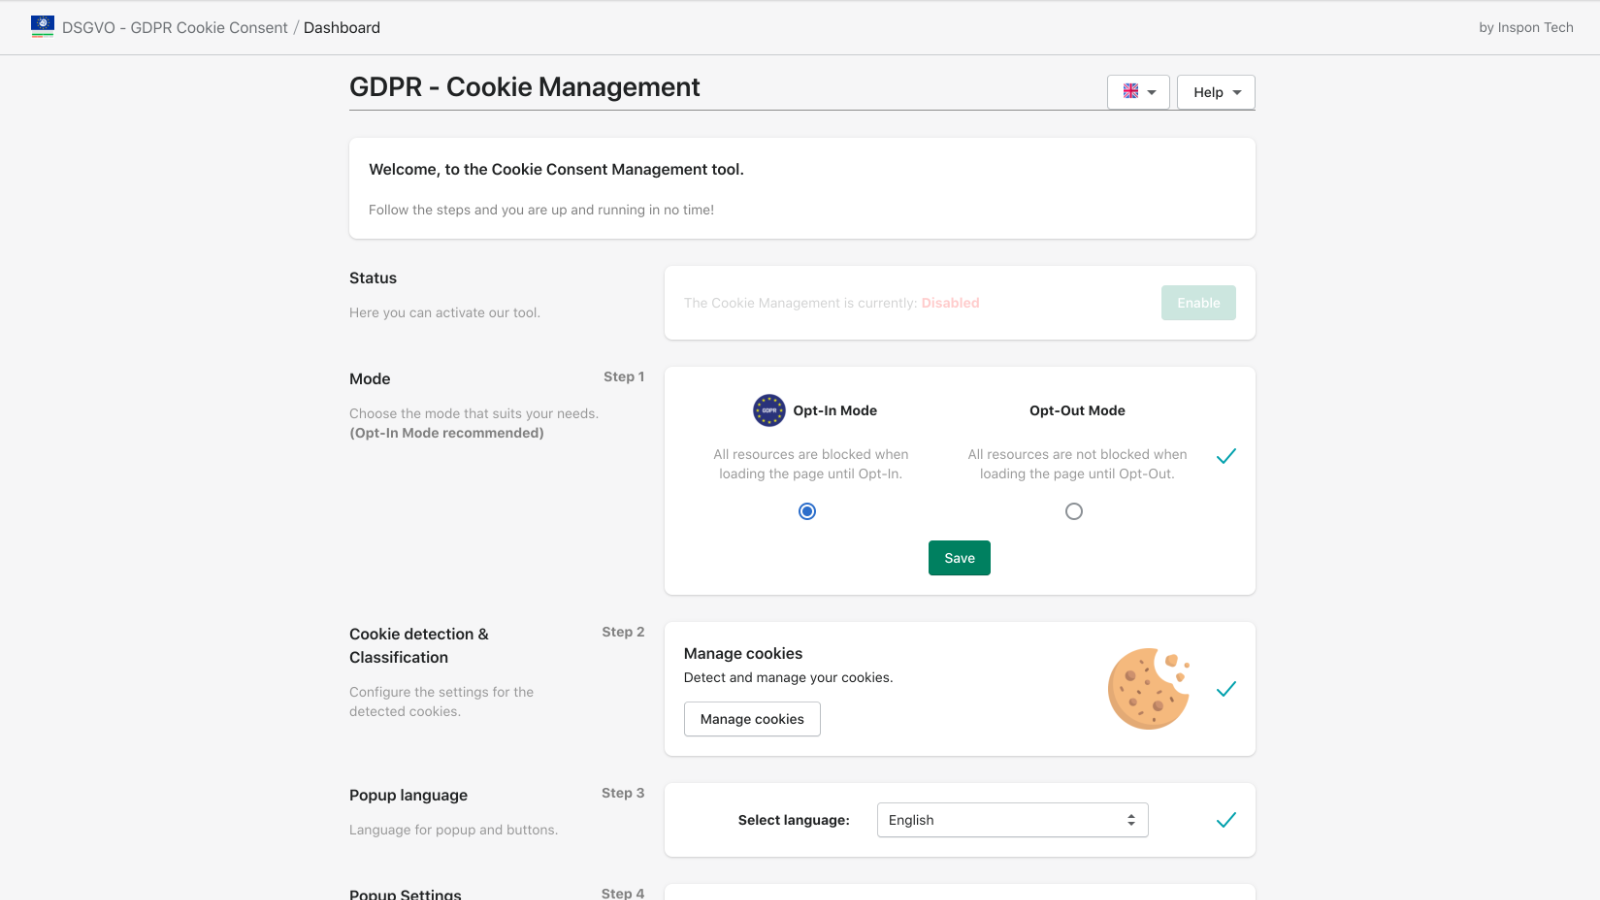 GDPR Cookie Consent Tool Dashboard